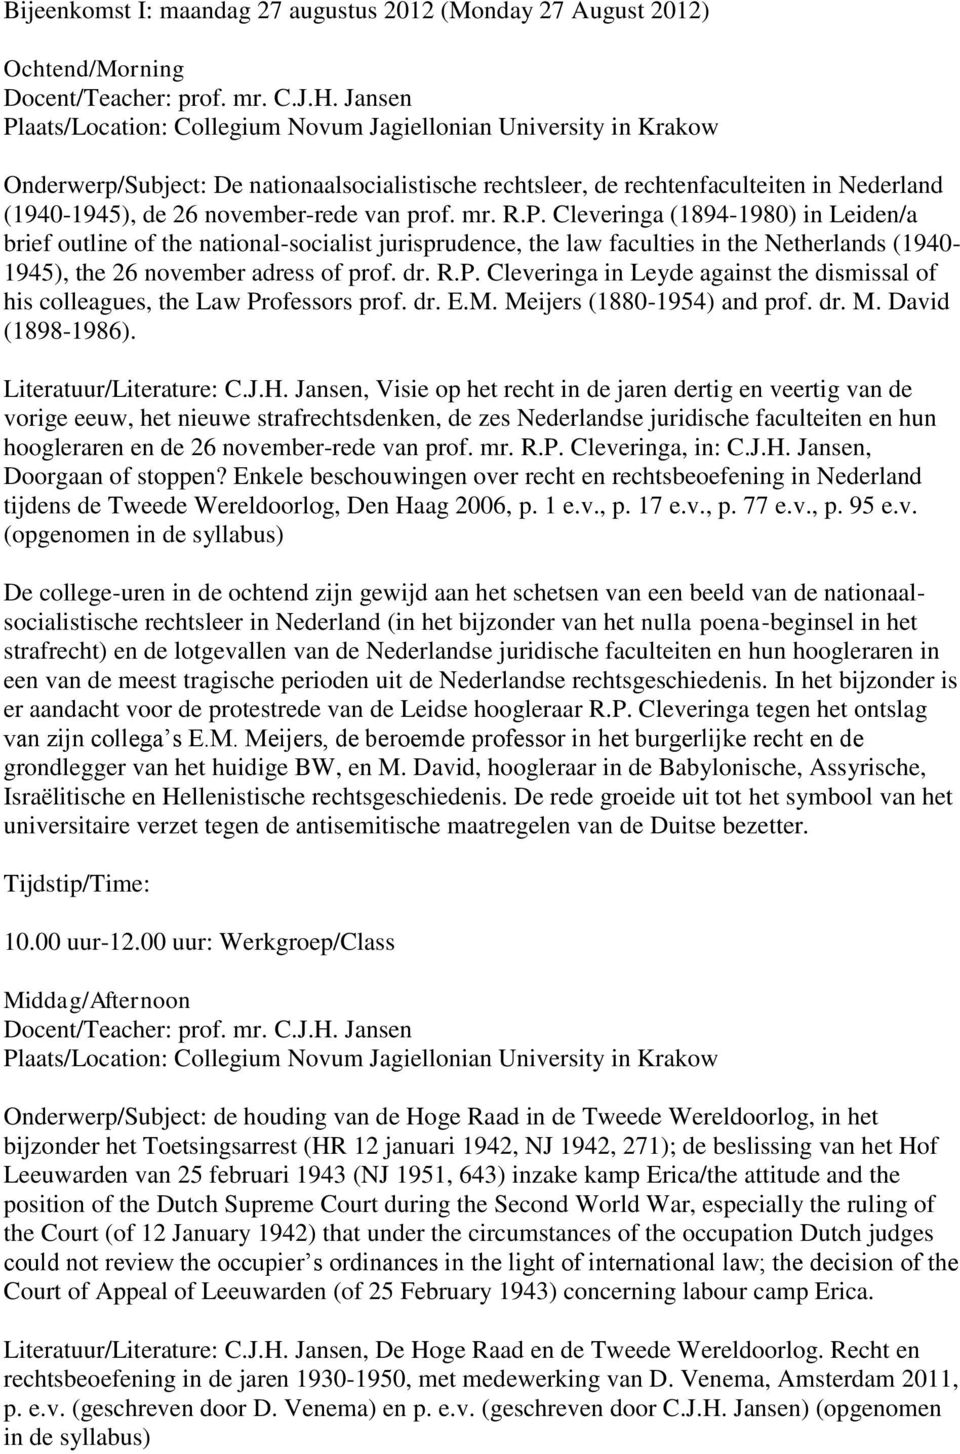 Cleveringa (1894-1980) in Leiden/a brief outline of the national-socialist jurisprudence, the law faculties in the Netherlands (1940-1945), the 26 november adress of prof. dr. R.P.